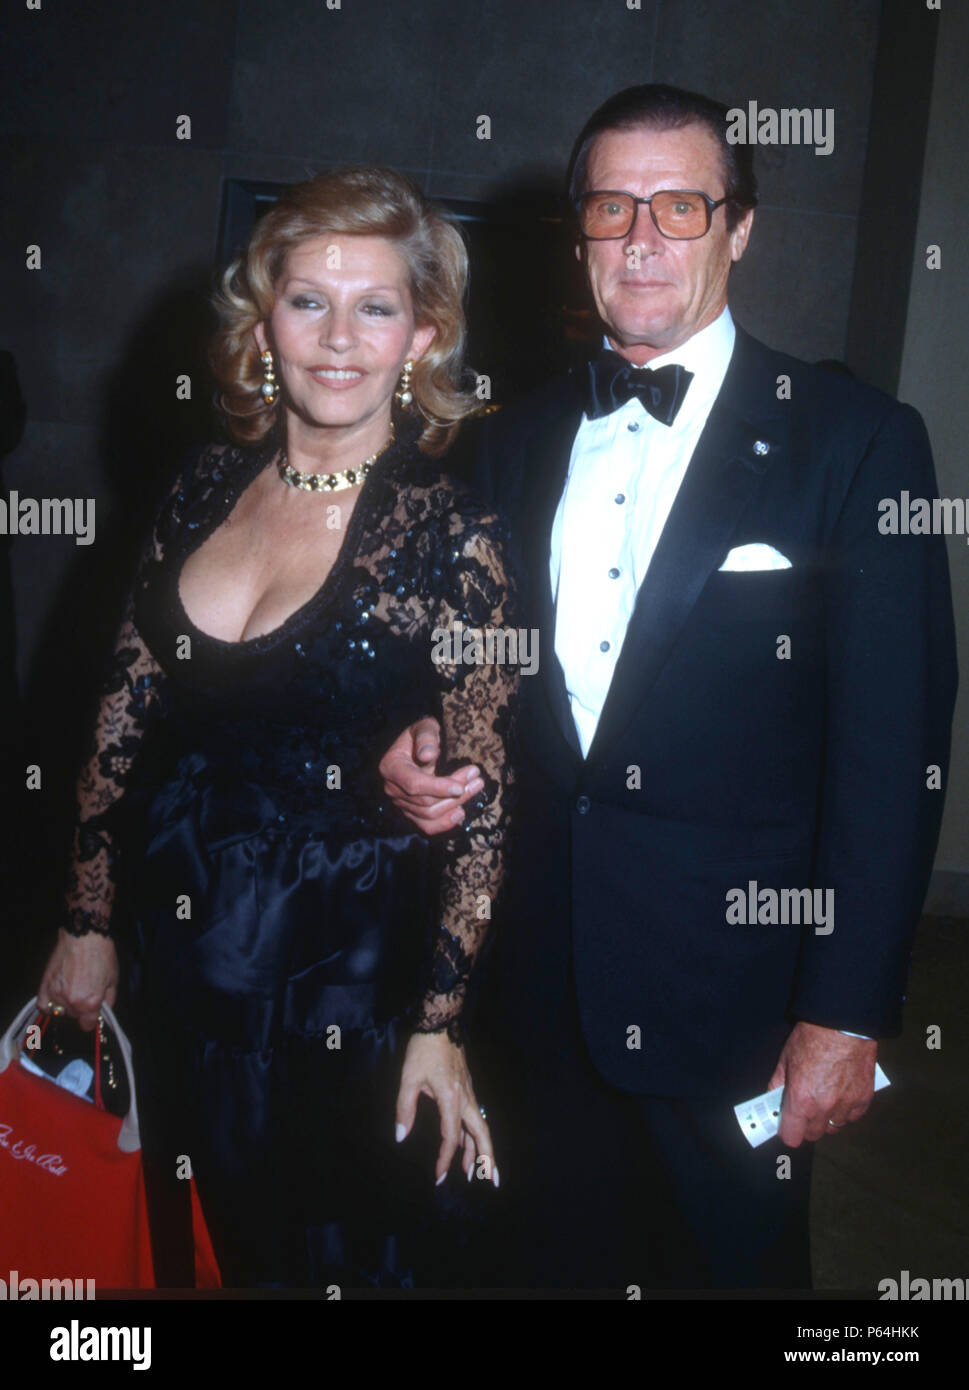 BEVERLY HILLS, CA - DECEMBER 4: (L-R) Luisa Mattioli and actor Roger Moore attend the Second Annual Fire & Ice Ball to Benefit the Revlon/UCLA Women's Cancer Research Program on December 4, 1991 at the Beverly Hilton Hotel in Beverly Hills, California. Photo by Barry King/Alamy Stock Photo Stock Photo